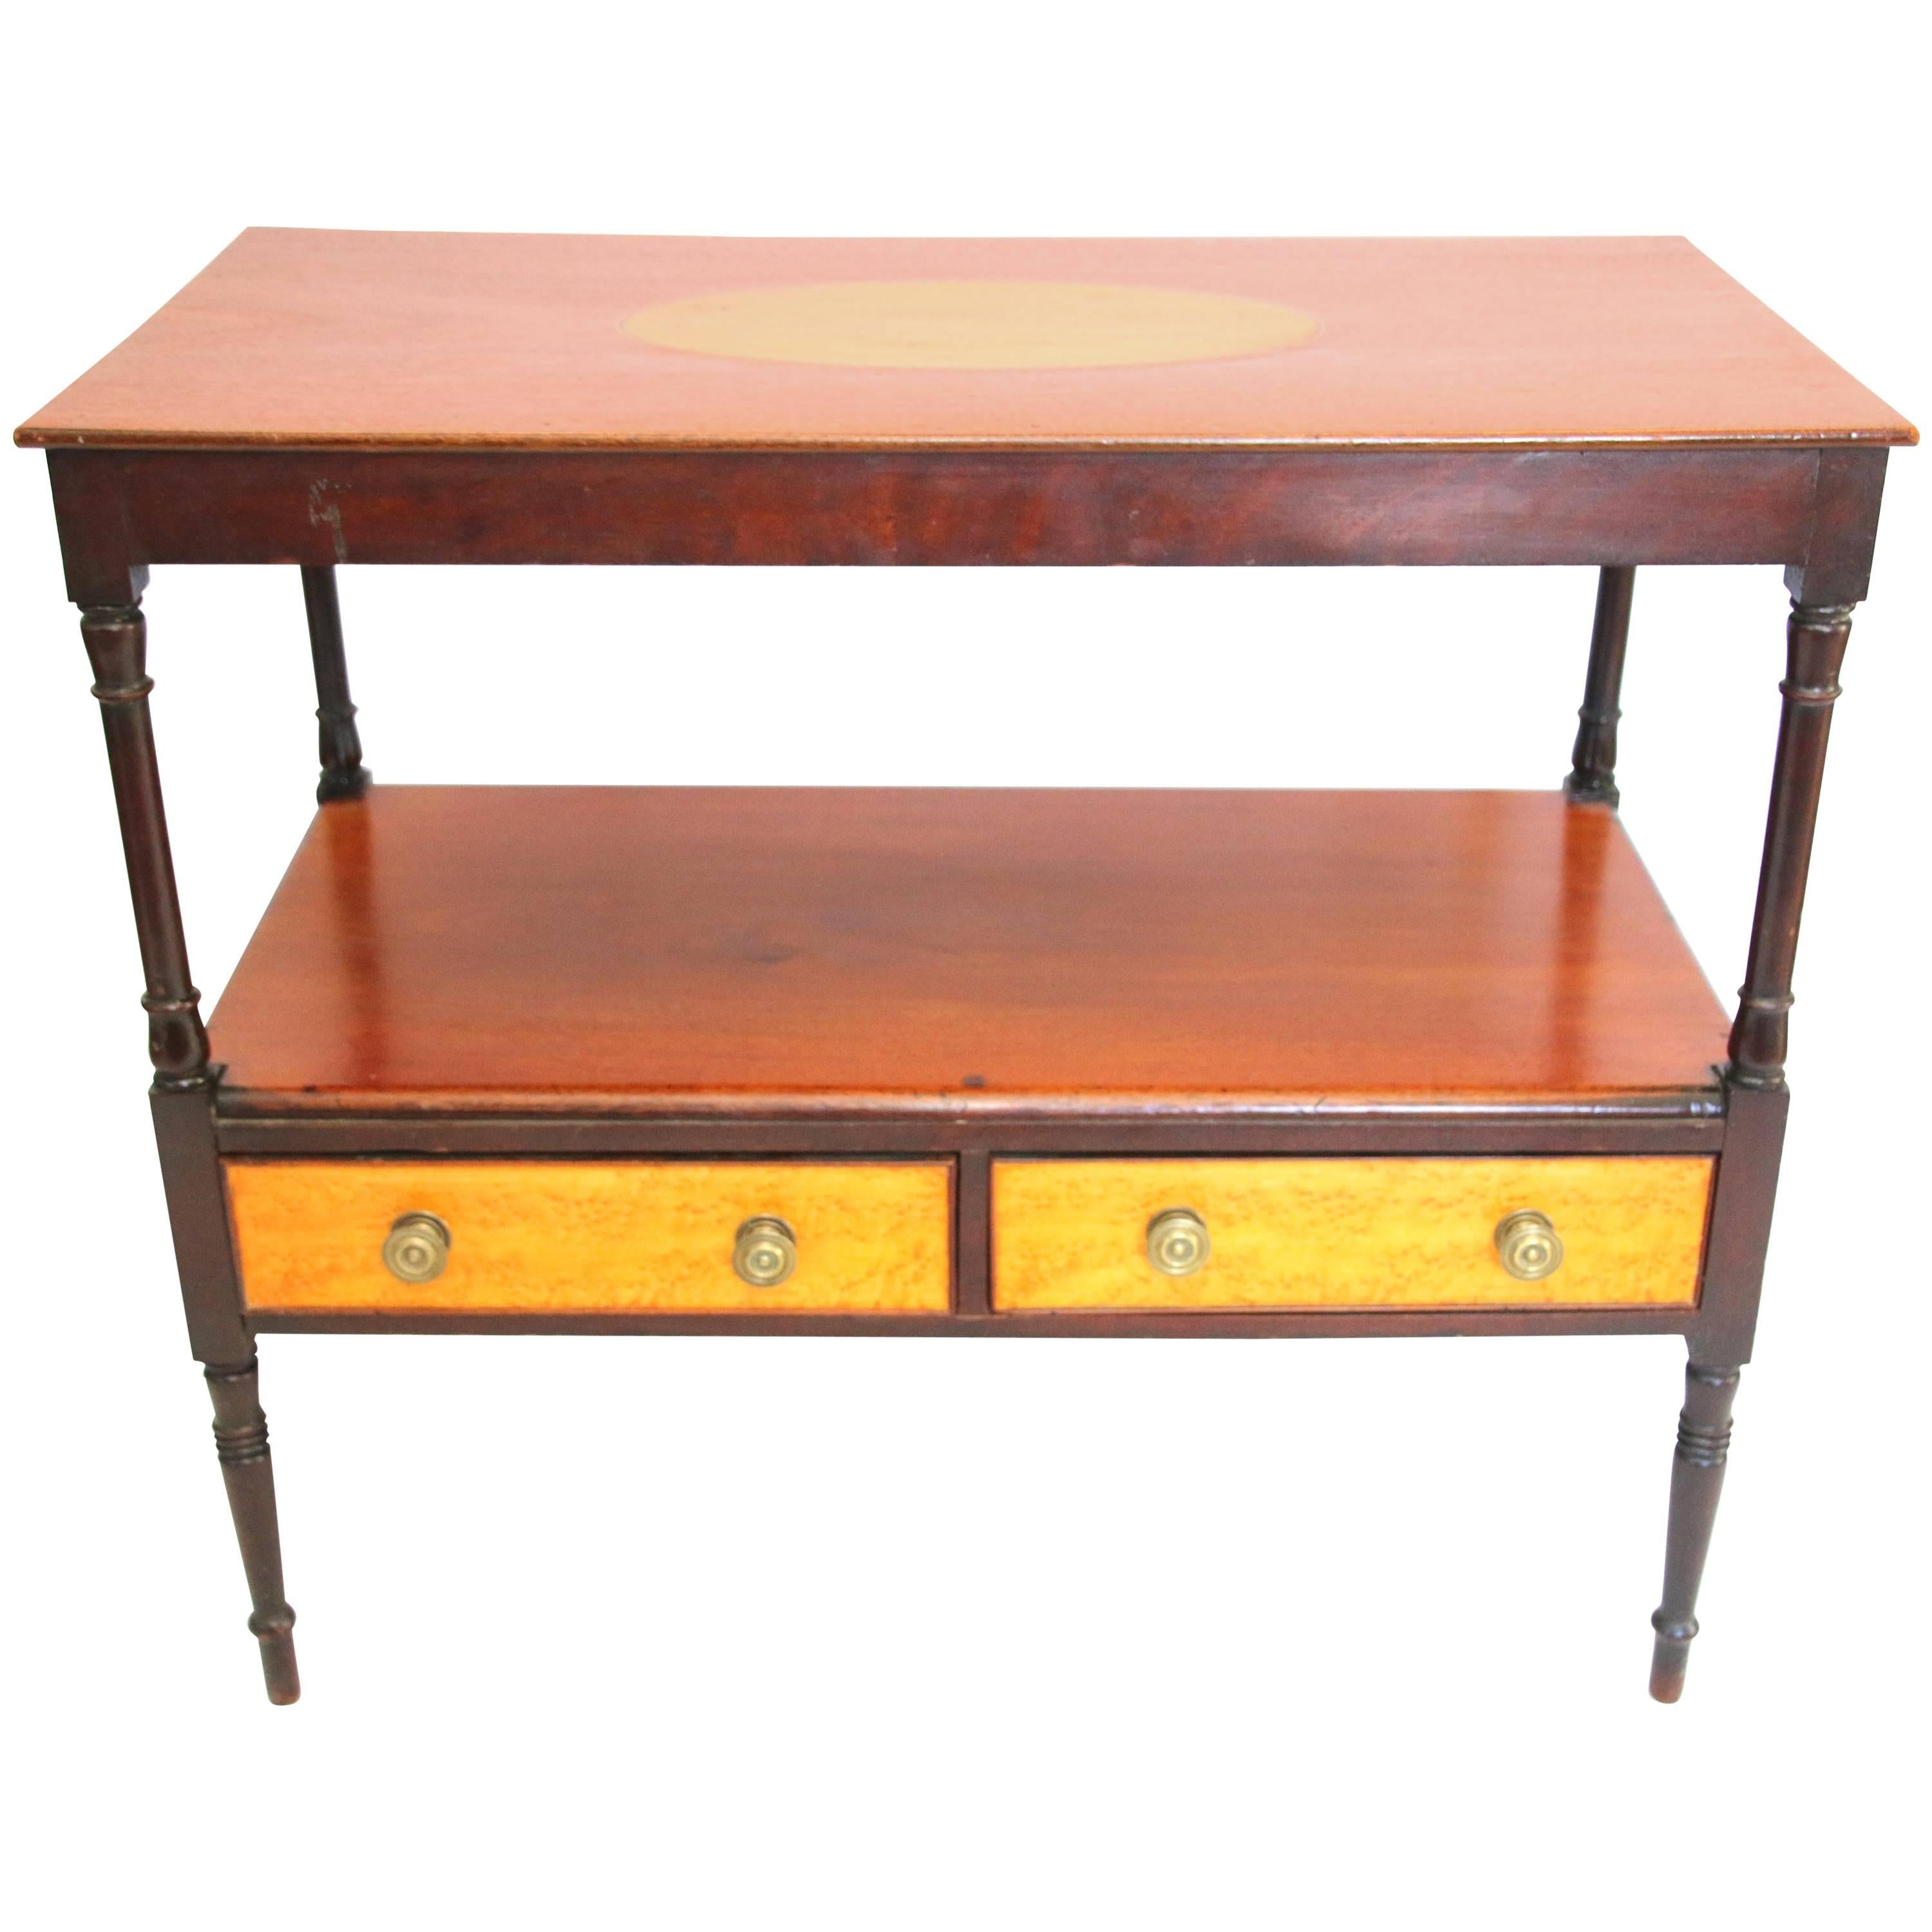 Early 19th Century Sheraton Diminutive Server or Butler's Table For Sale